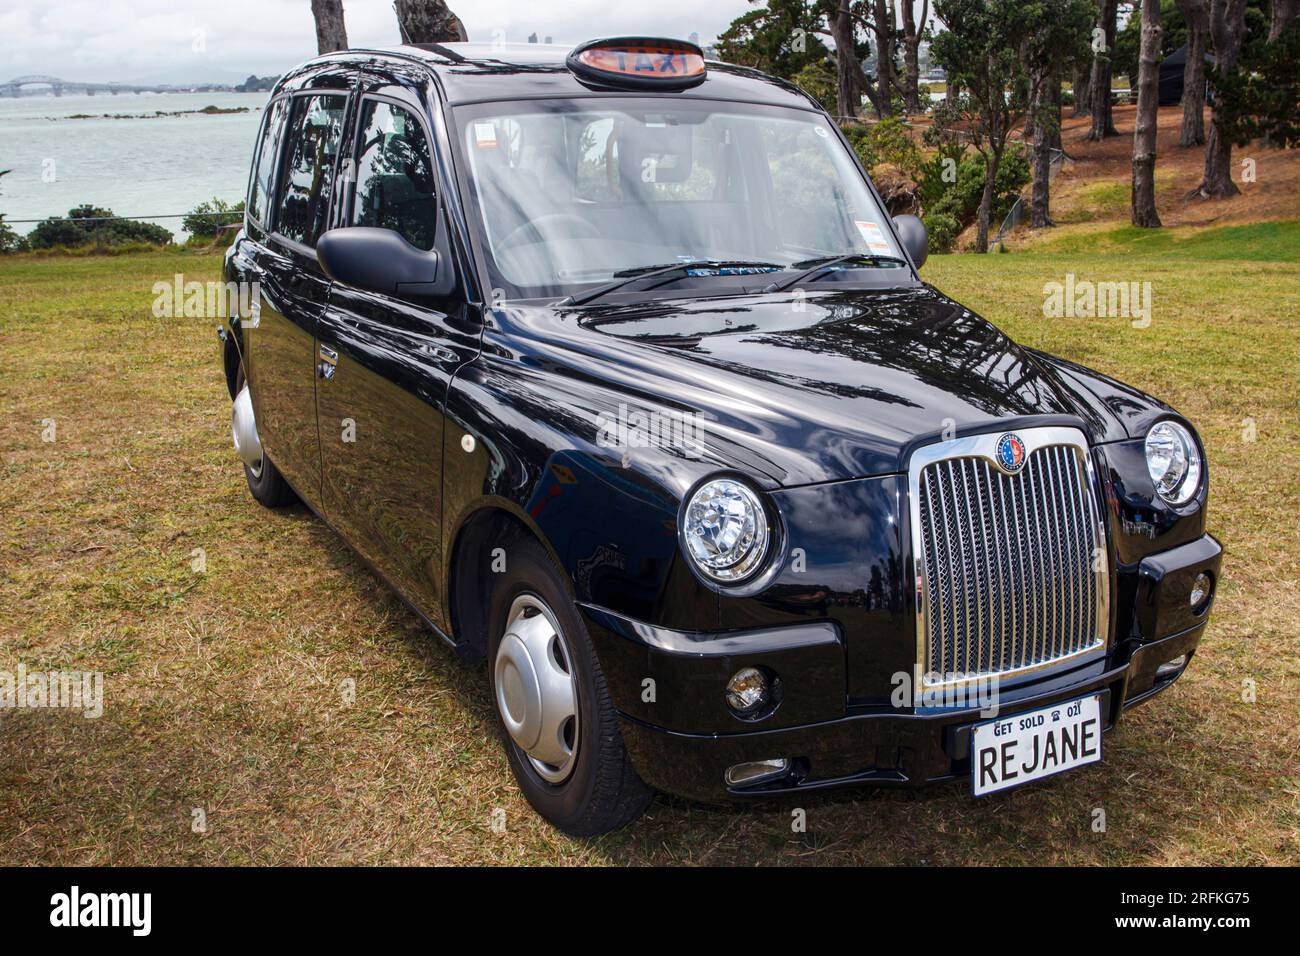 A London Black Taxi Cab parked on grass in New Zealand Stock Photo